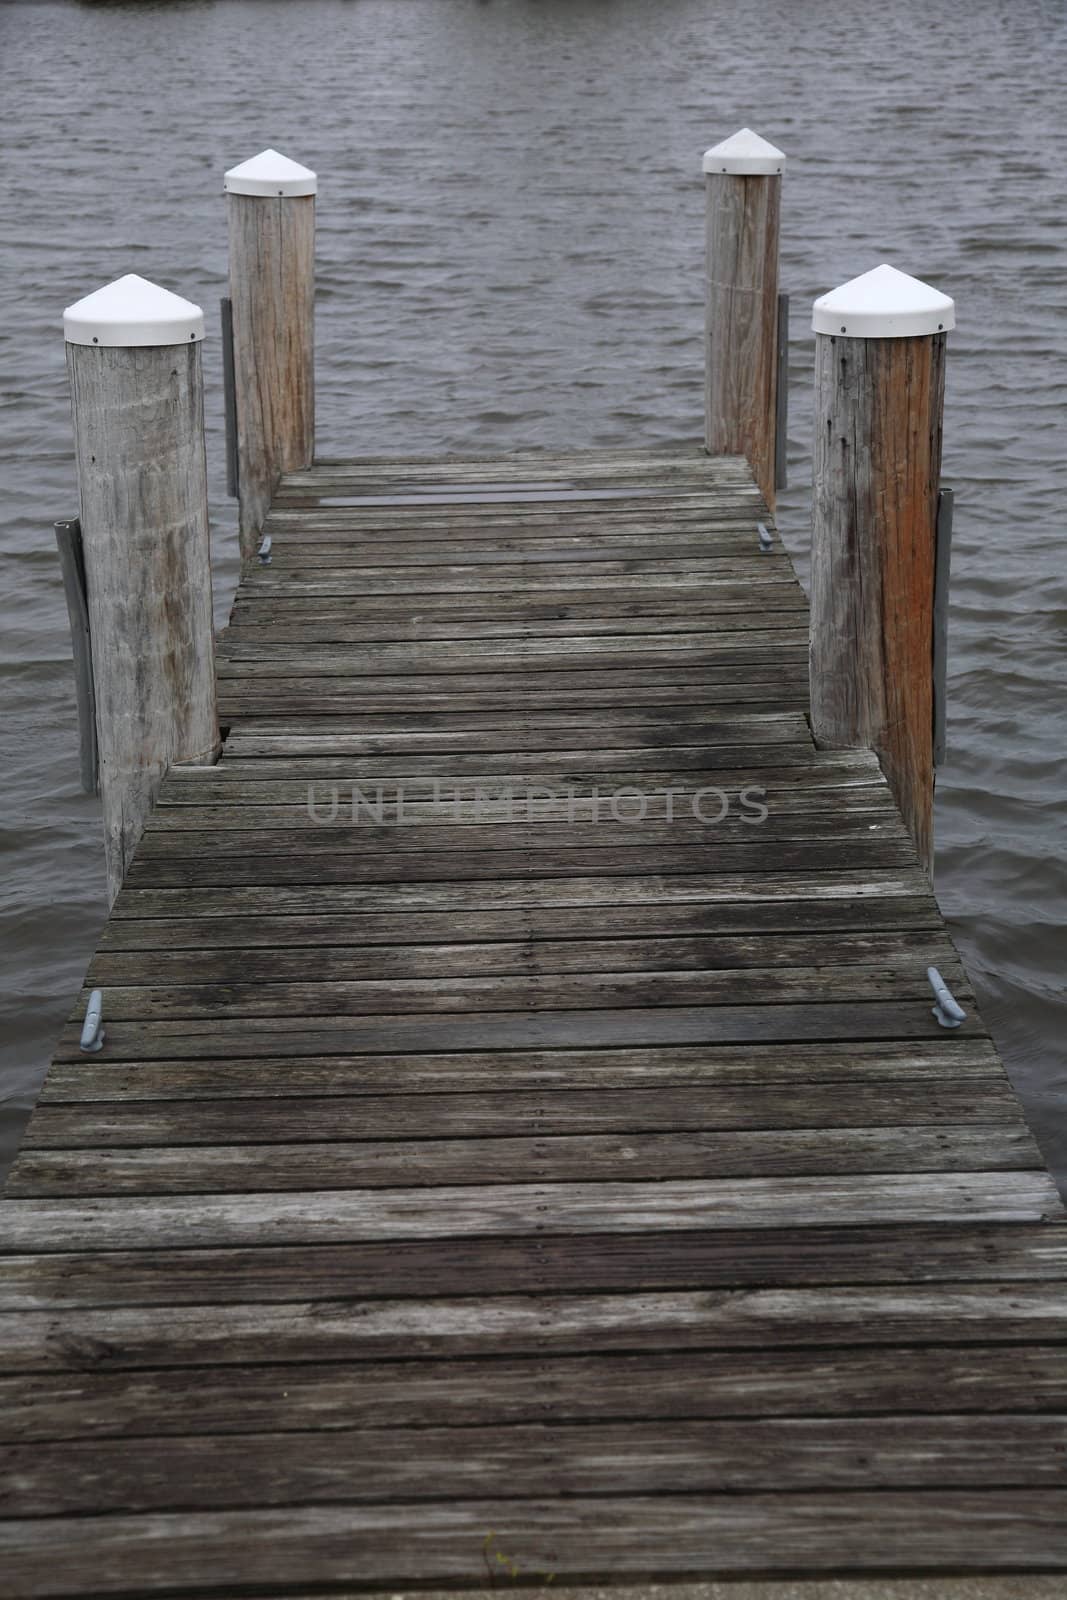 Dock by Ffooter